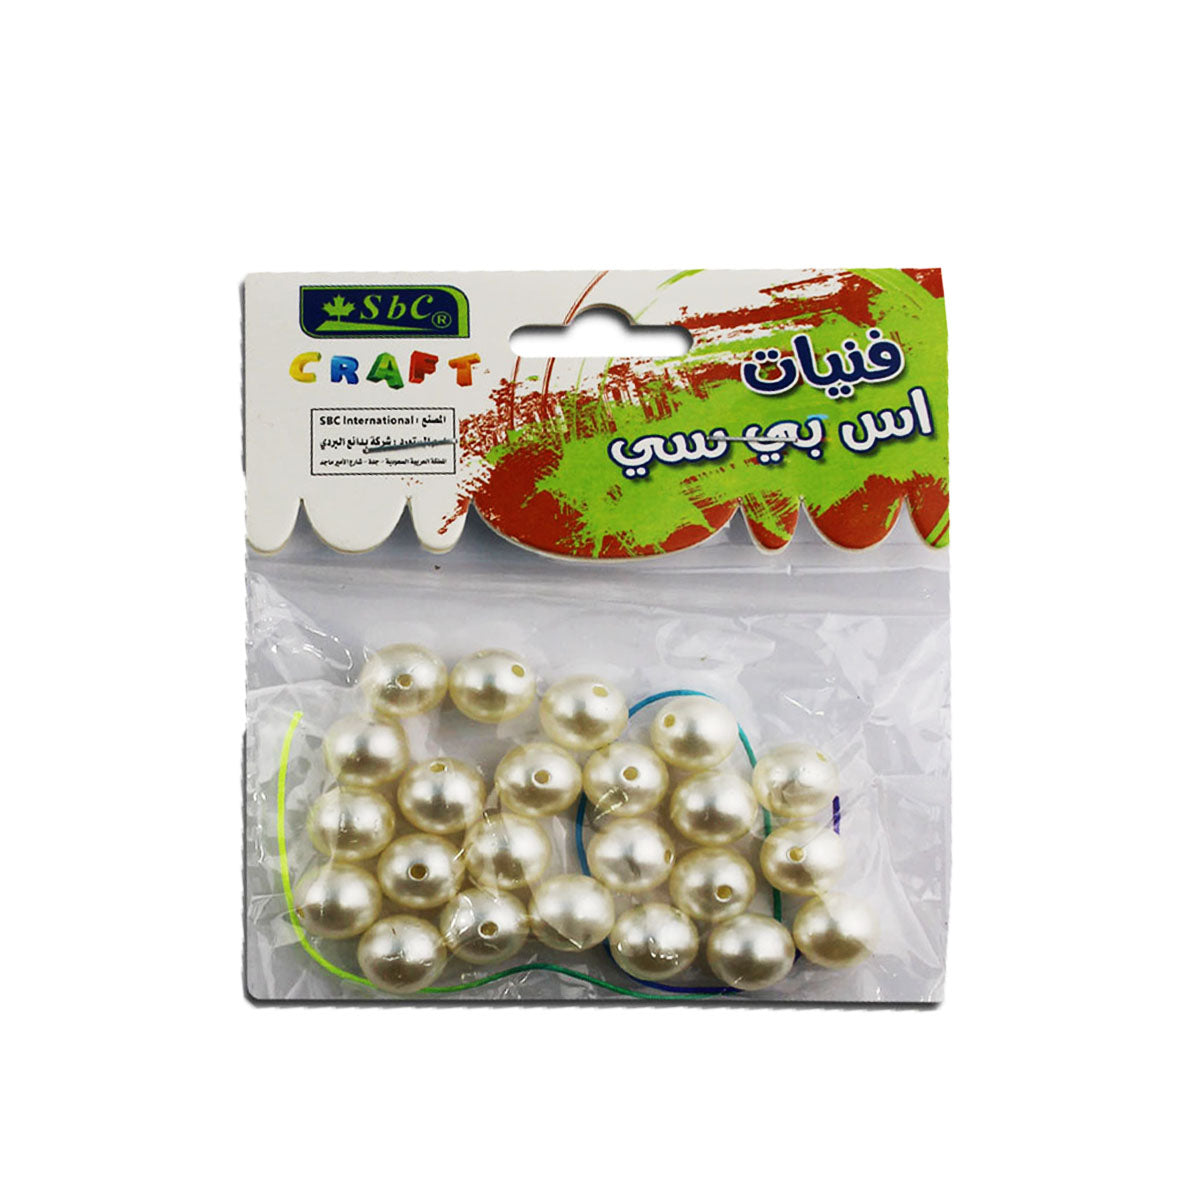 Shop Crafts Silver Pearl Beads 20 gm -Tailoring Items online in Abu Dhabi, UAE